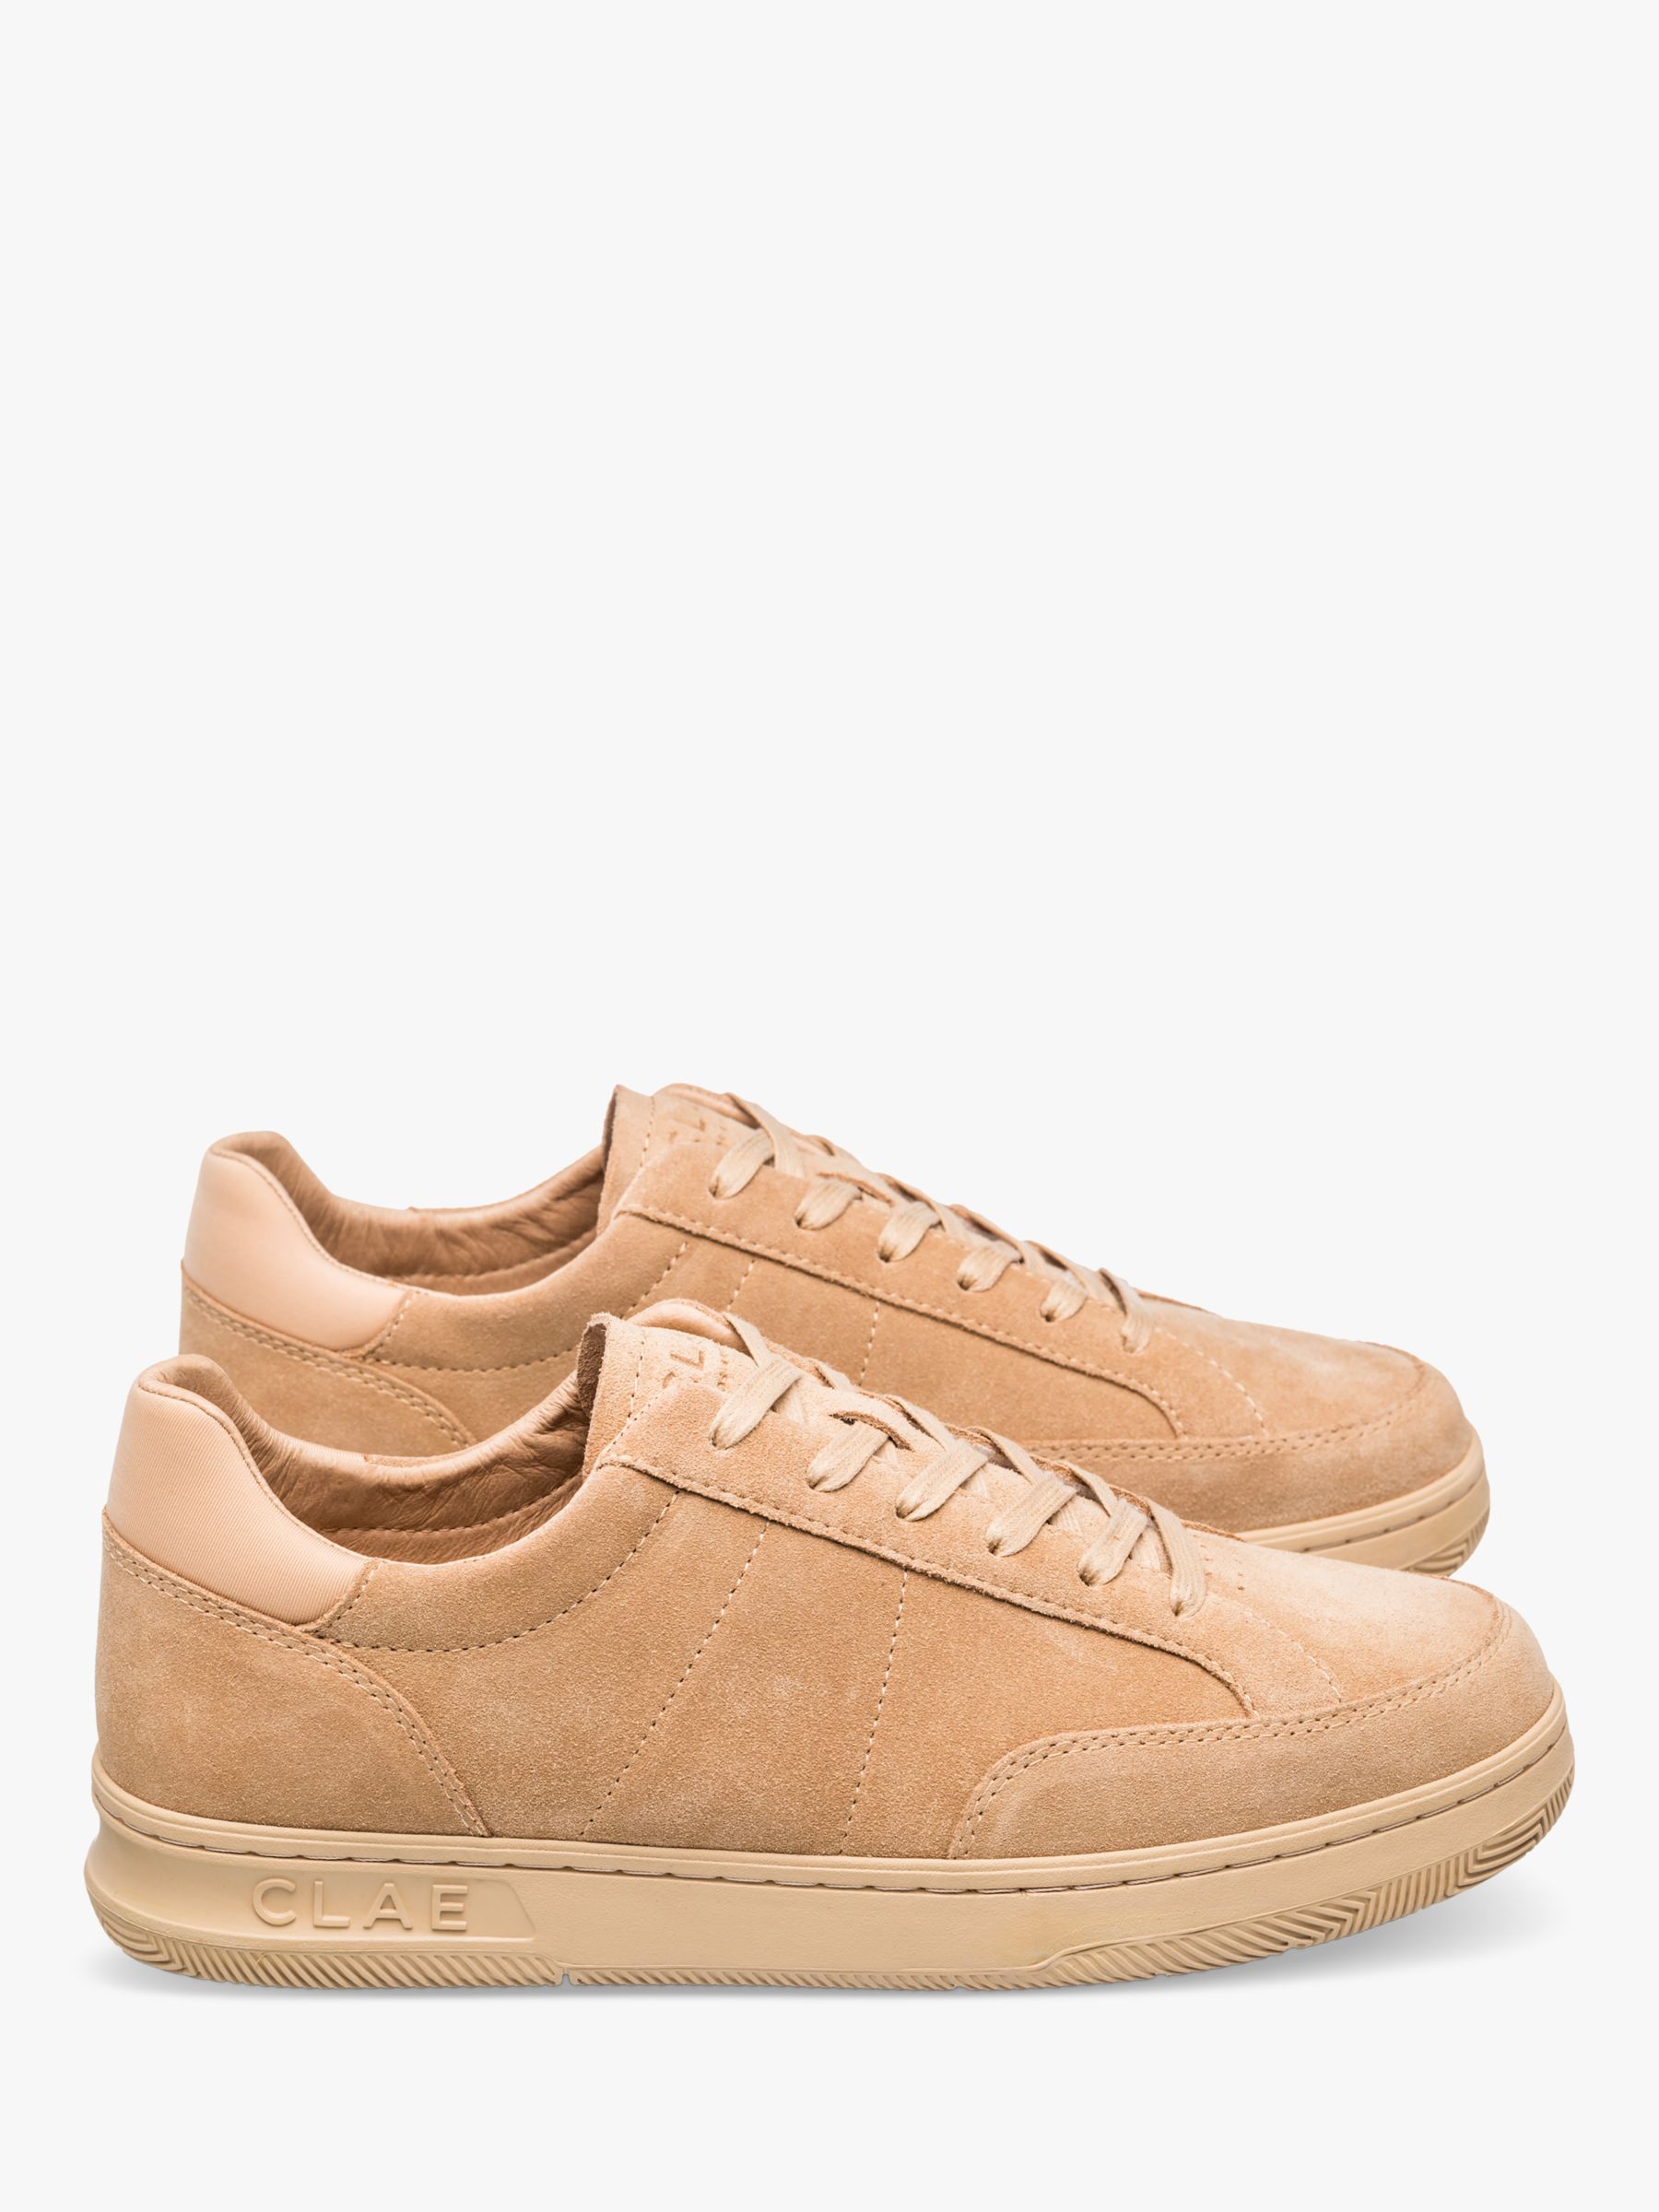 CLAE Monroe Suede Lace Up Trainers, Starfish, 7.5